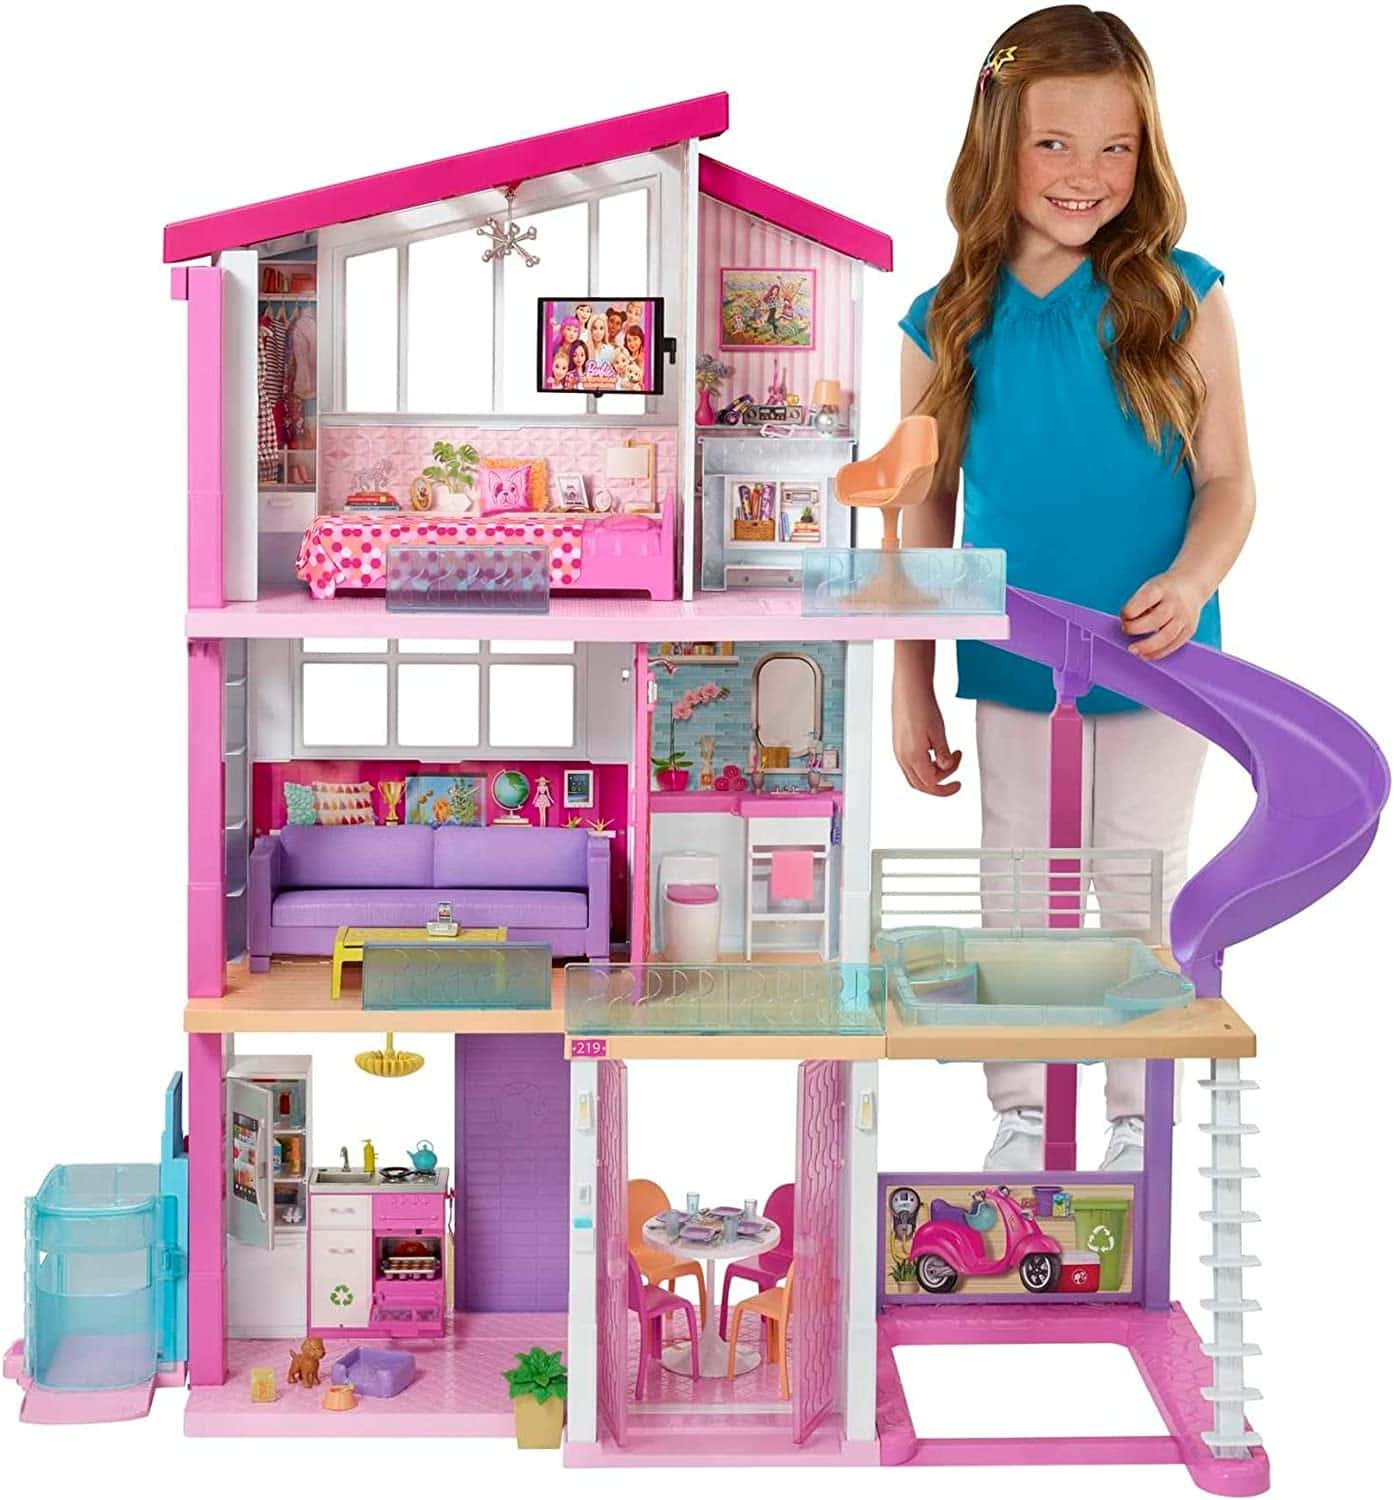 3-story dollhouse with slide and little girl standing next to it 